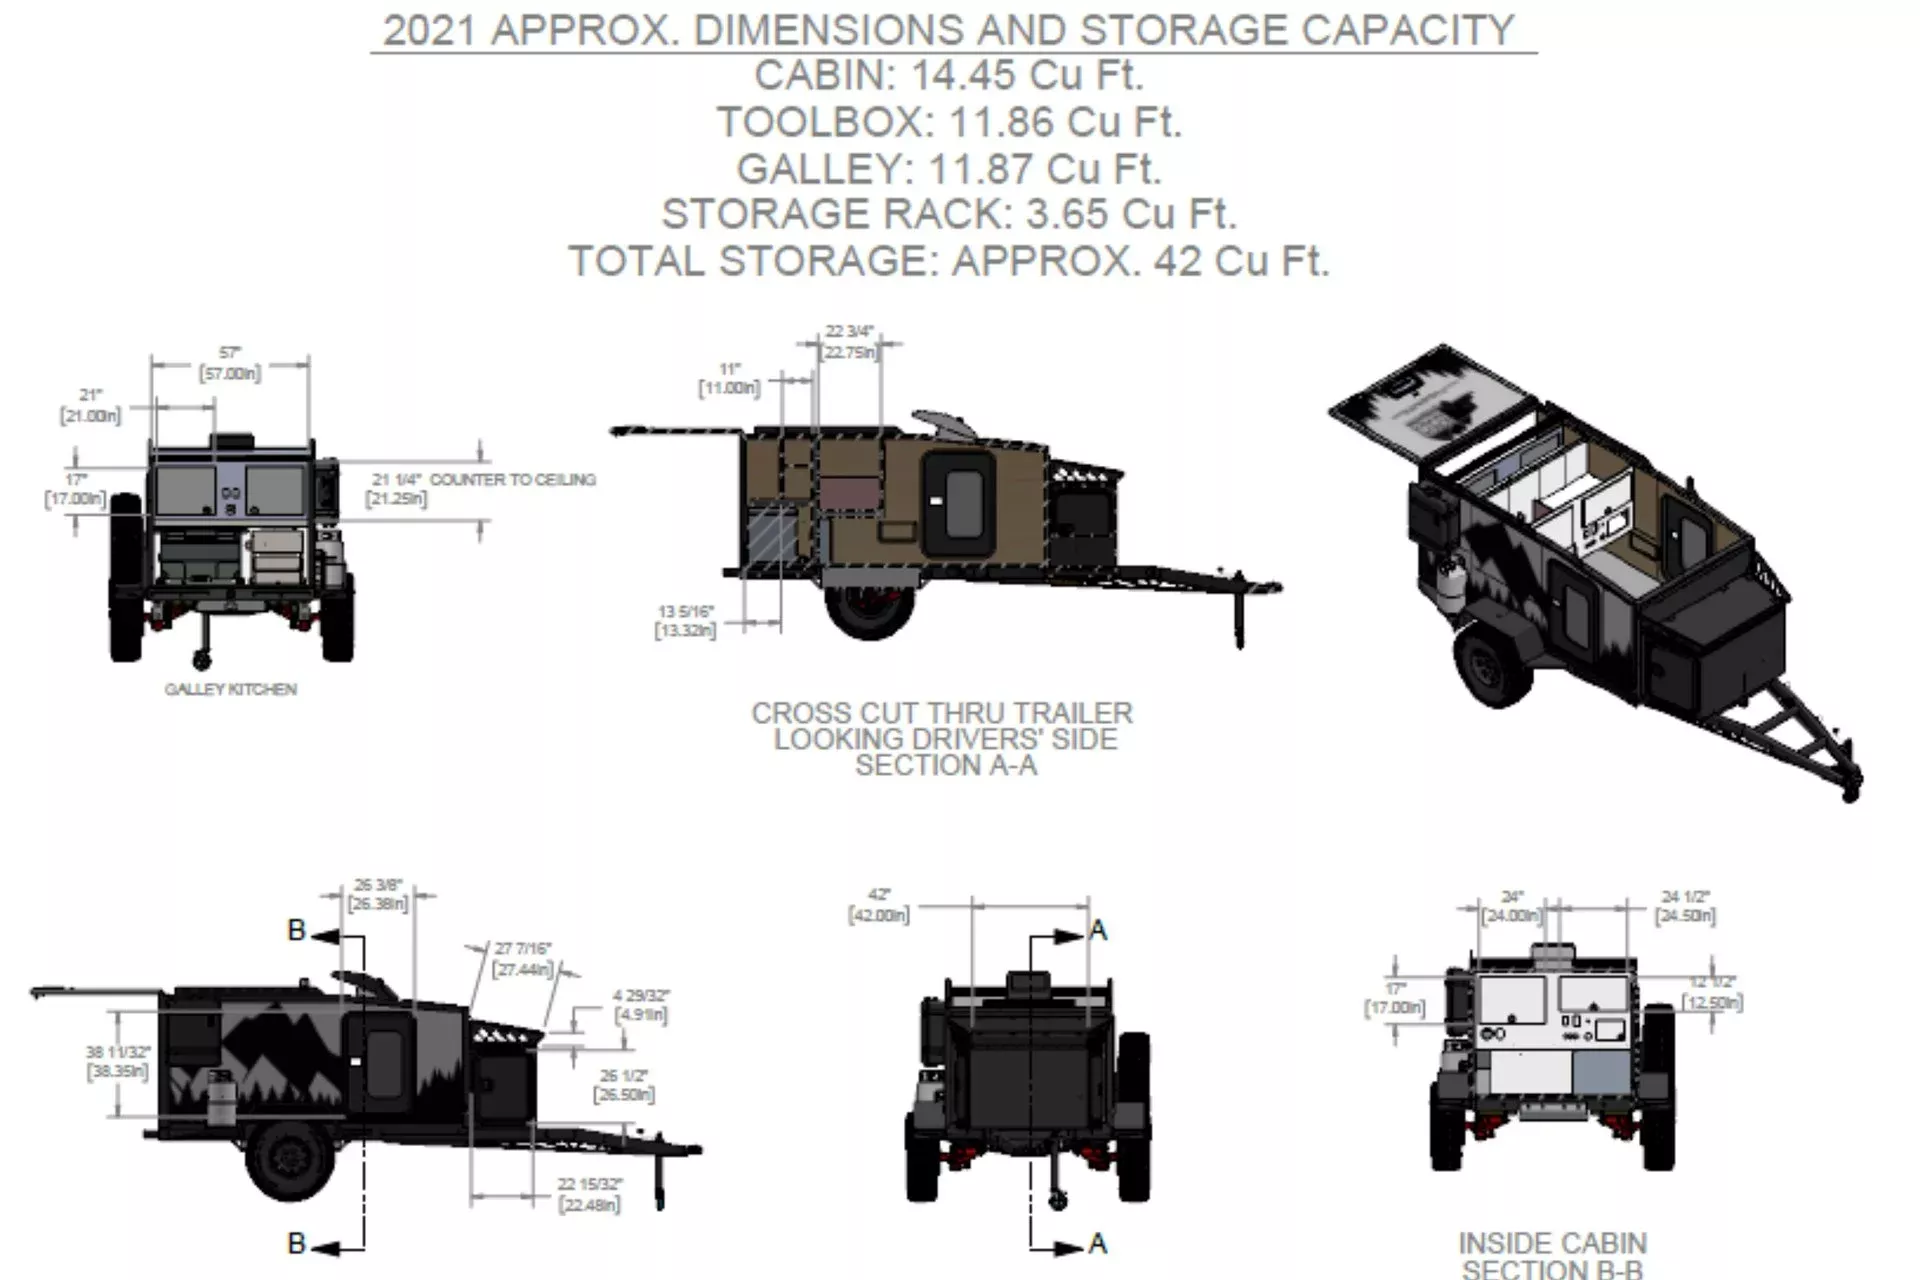 Dimensions of the Boreas Campers XT offroad camper